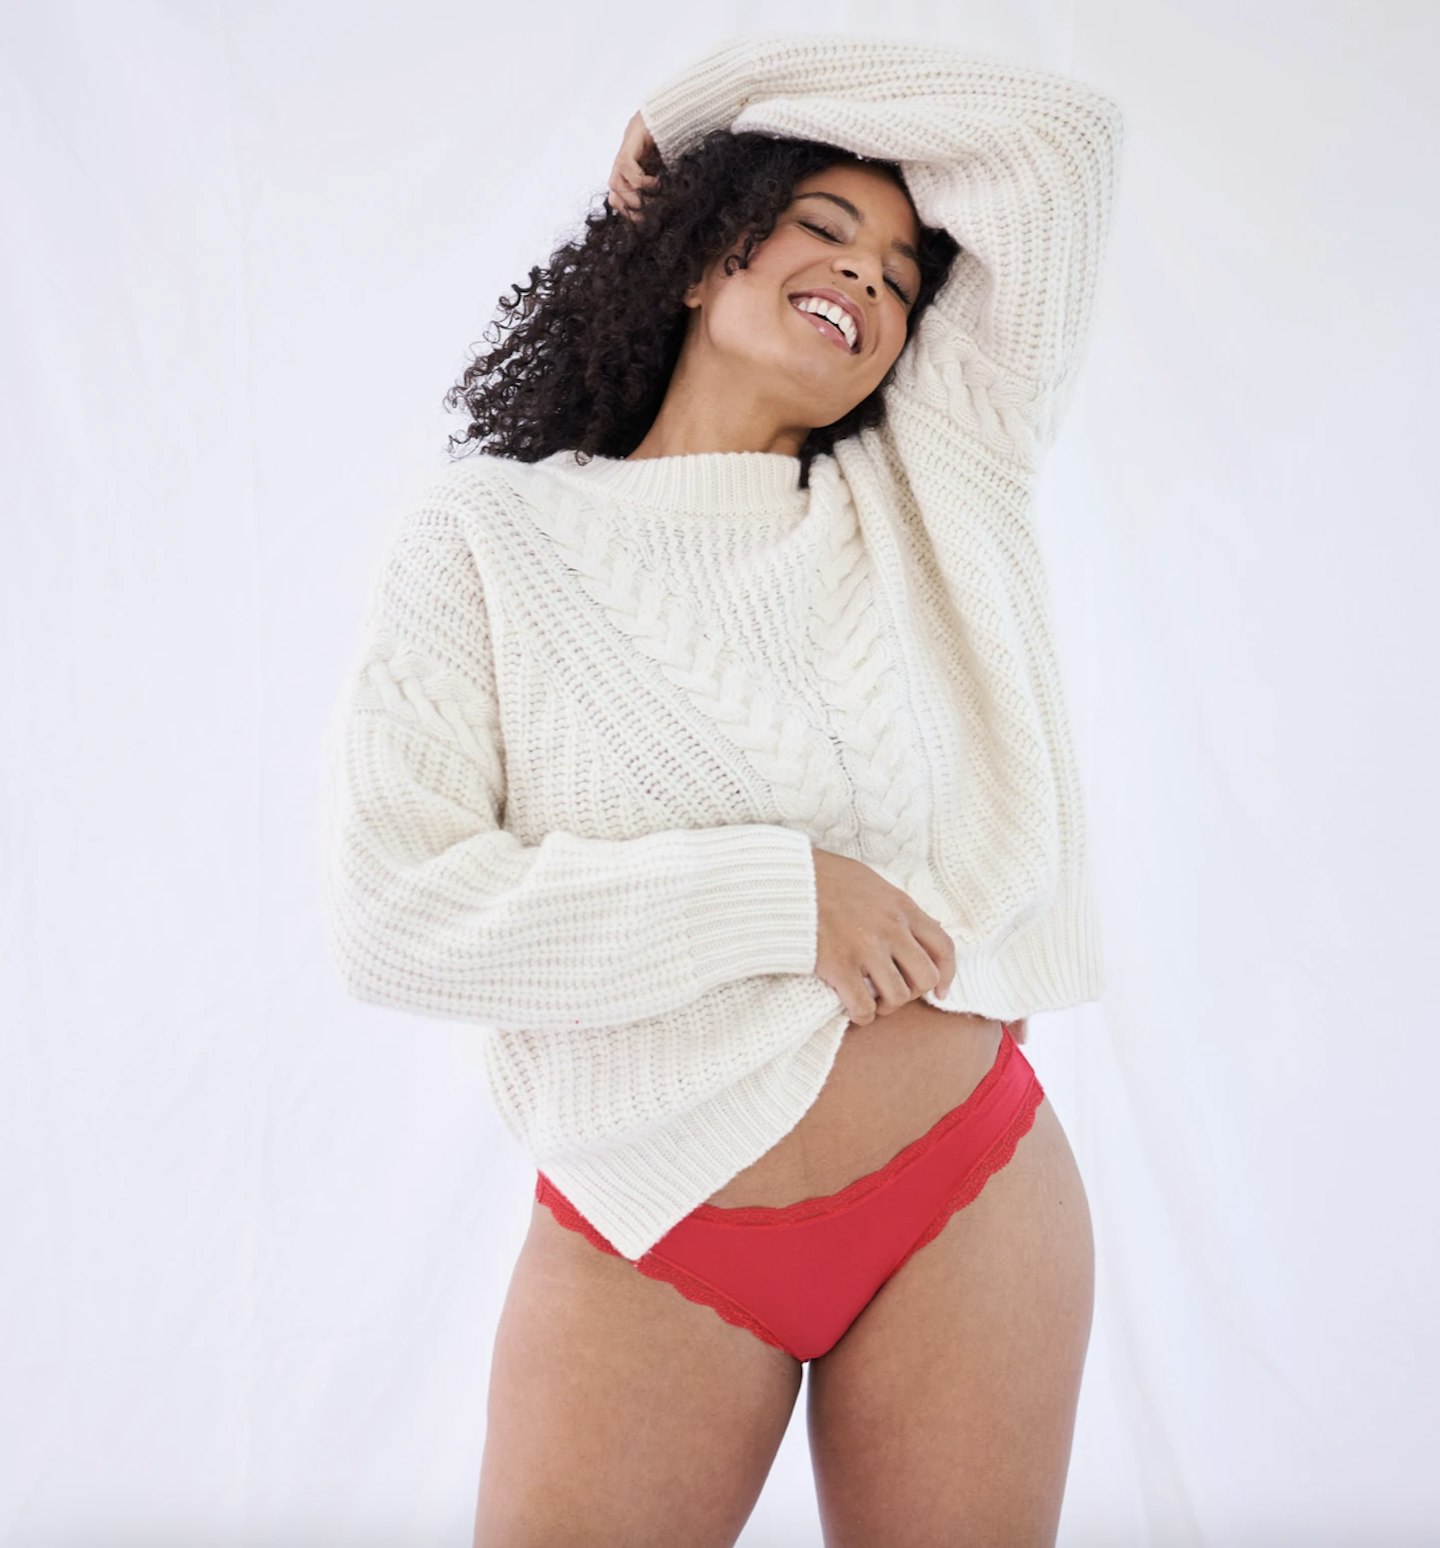 Lunchtime Shop Tuesday - Stripe & Stare, Plain Red Knickers, £15